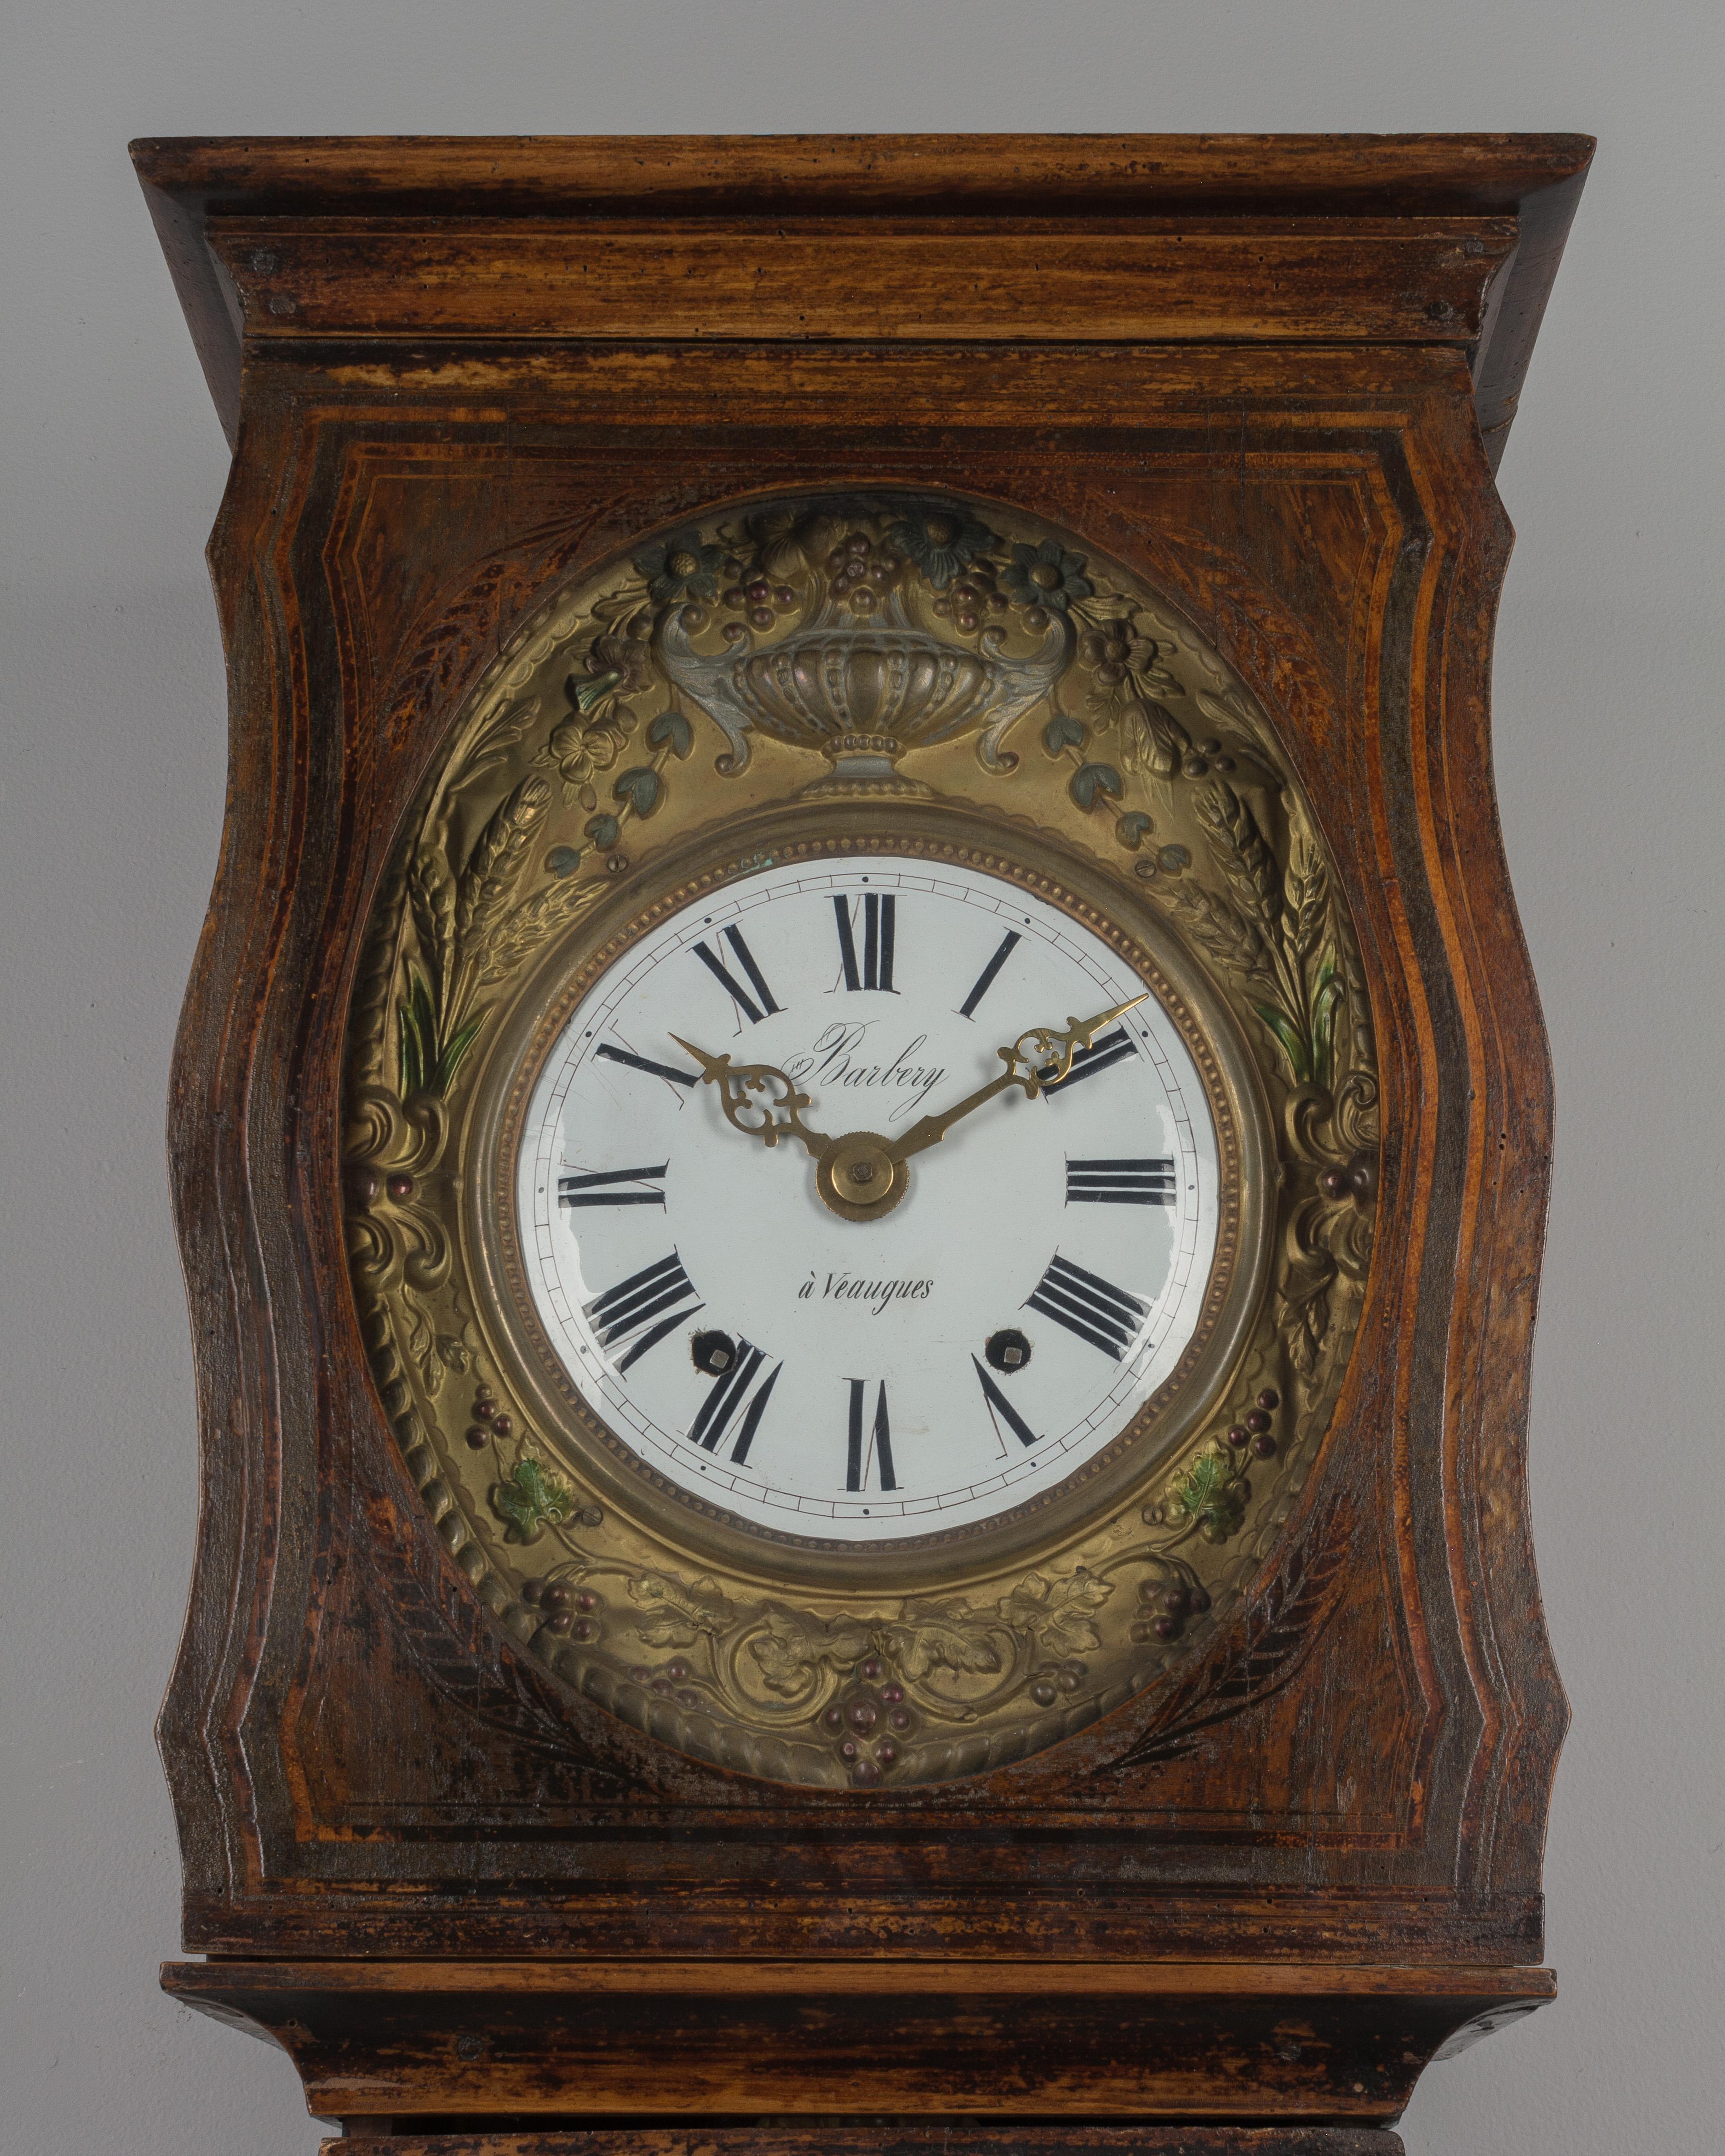 French Provincial 19th Century French Comtoise Grandfather Clock